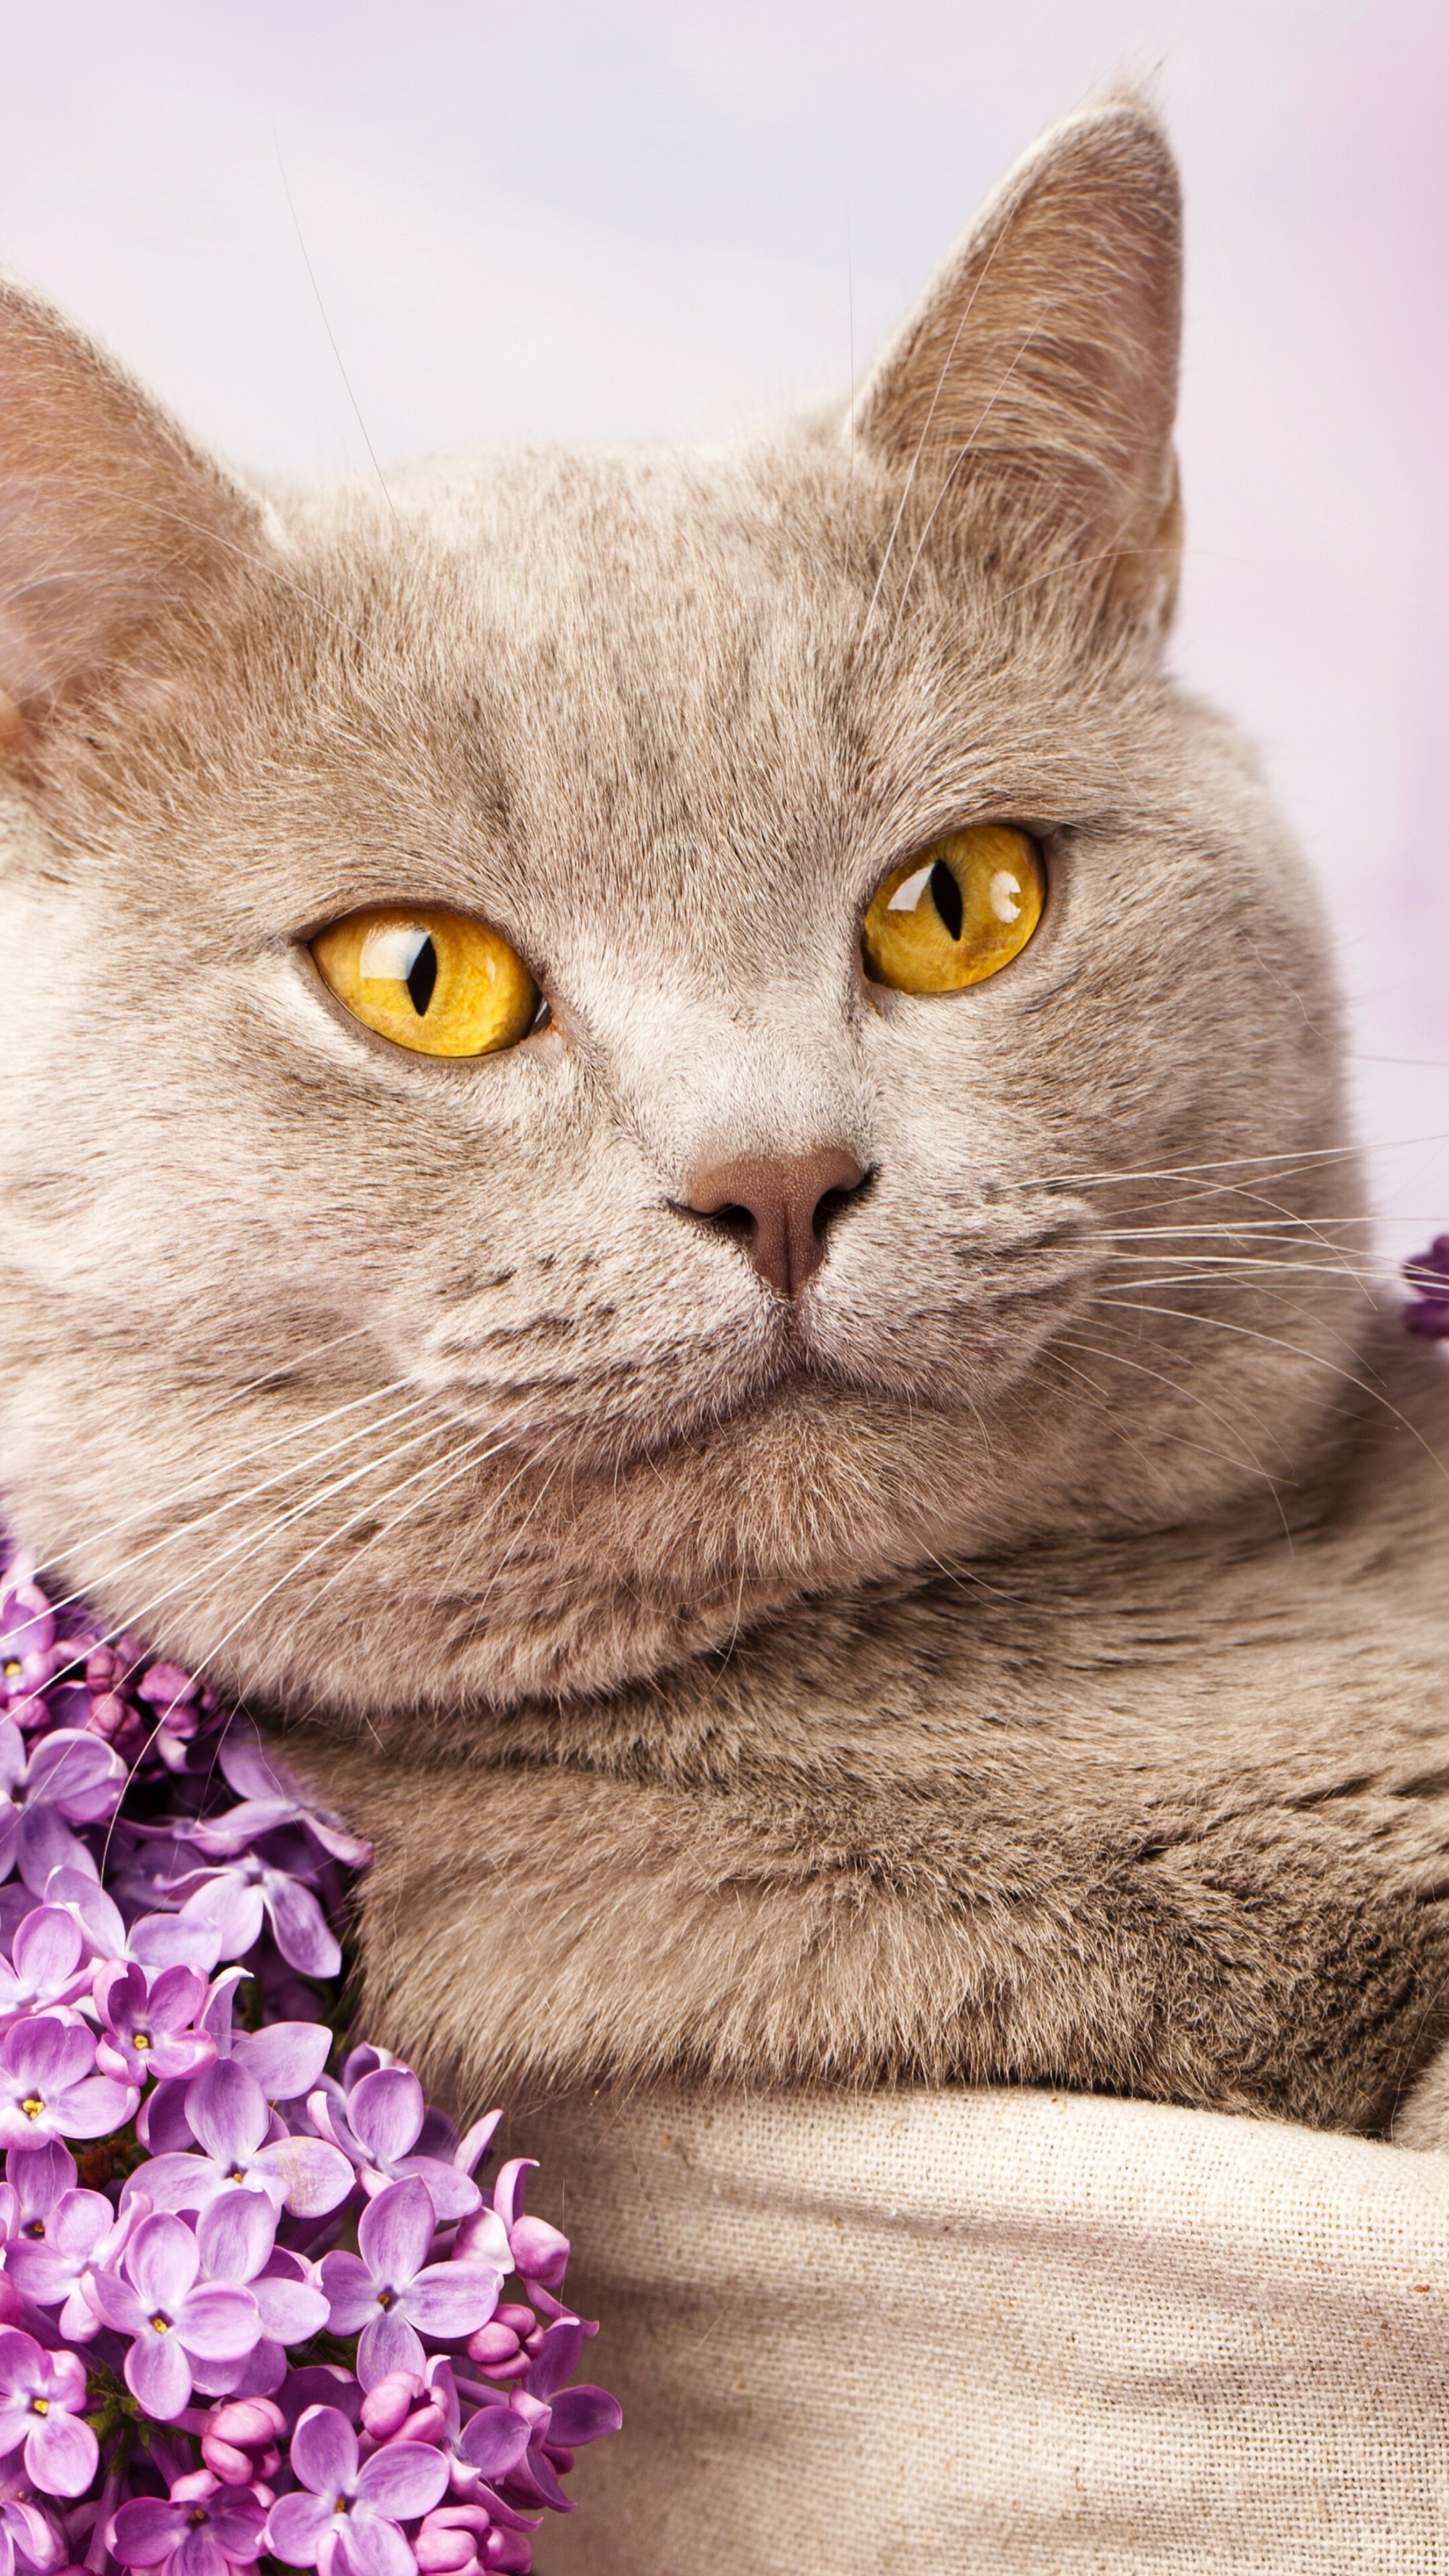 British Cat: The pedigreed version of the traditional English domestic cats, with a distinctively stocky body, dense coat, and broad face. 2160x3840 4K Background.